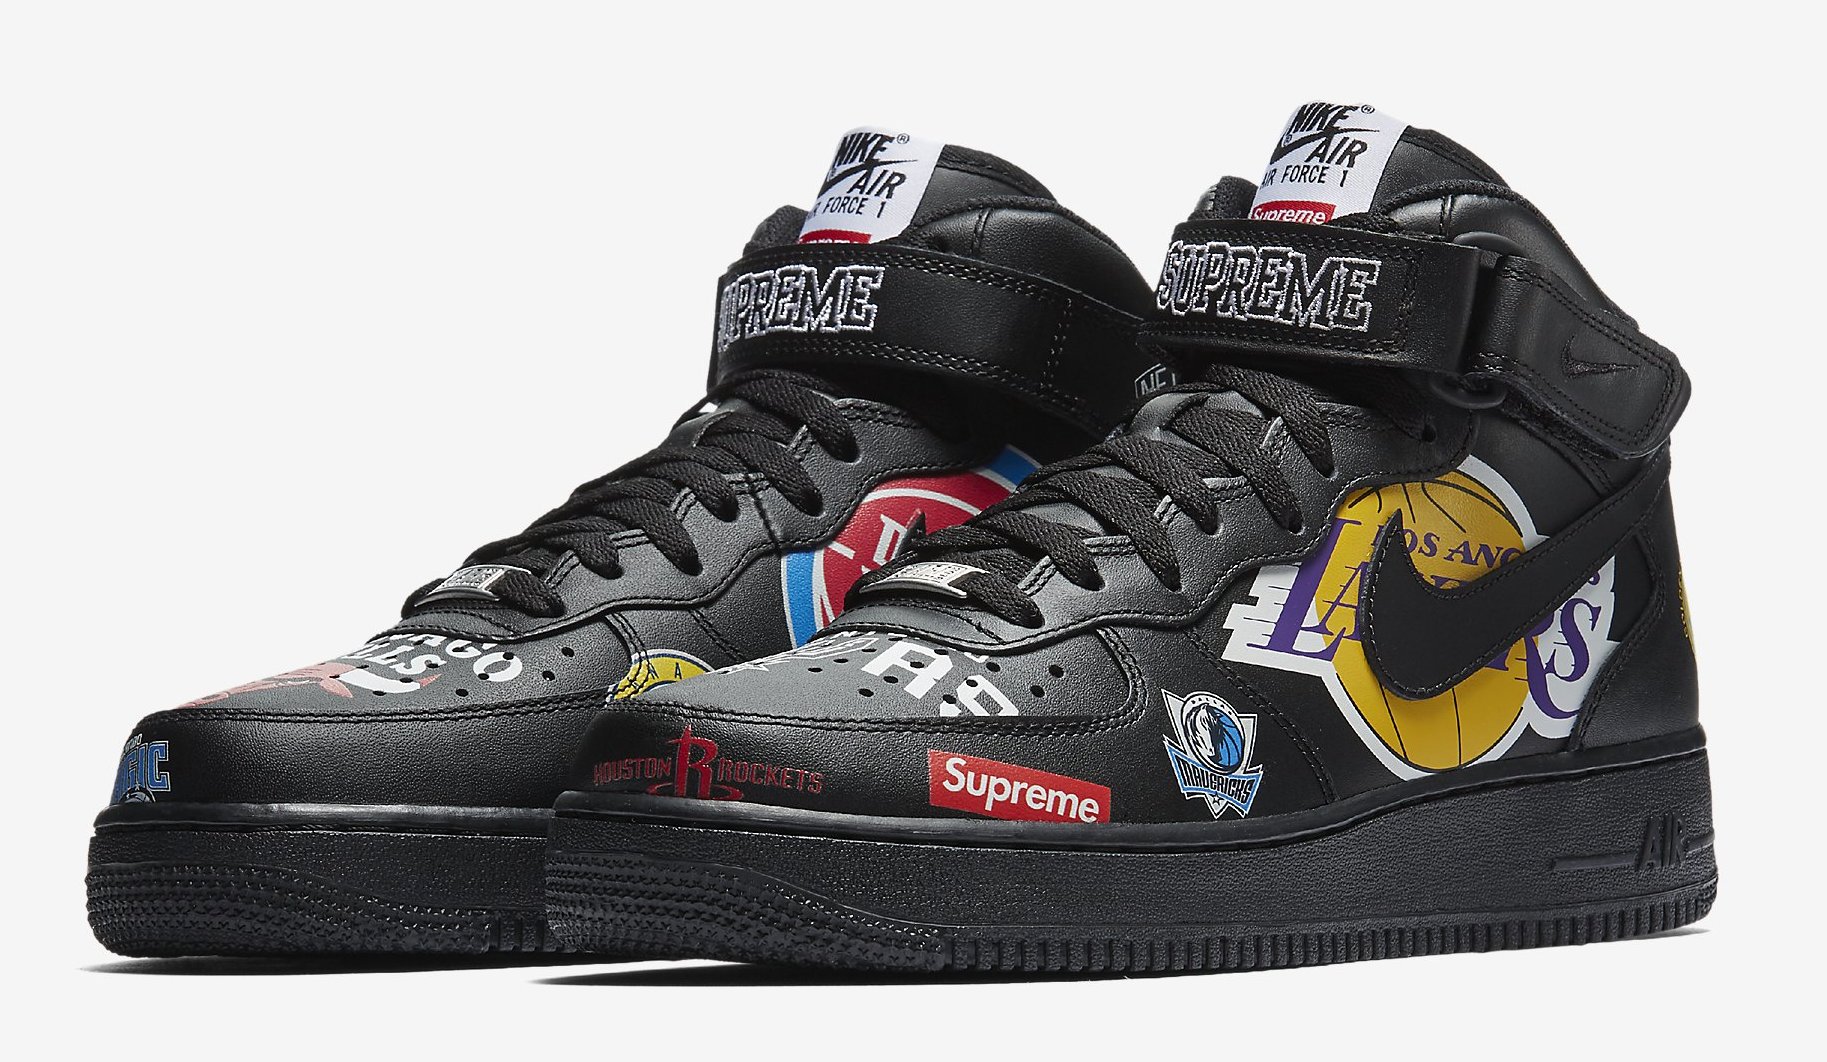 Supreme x Nike Air Force 1 Mids Are Coming Soon | Complex